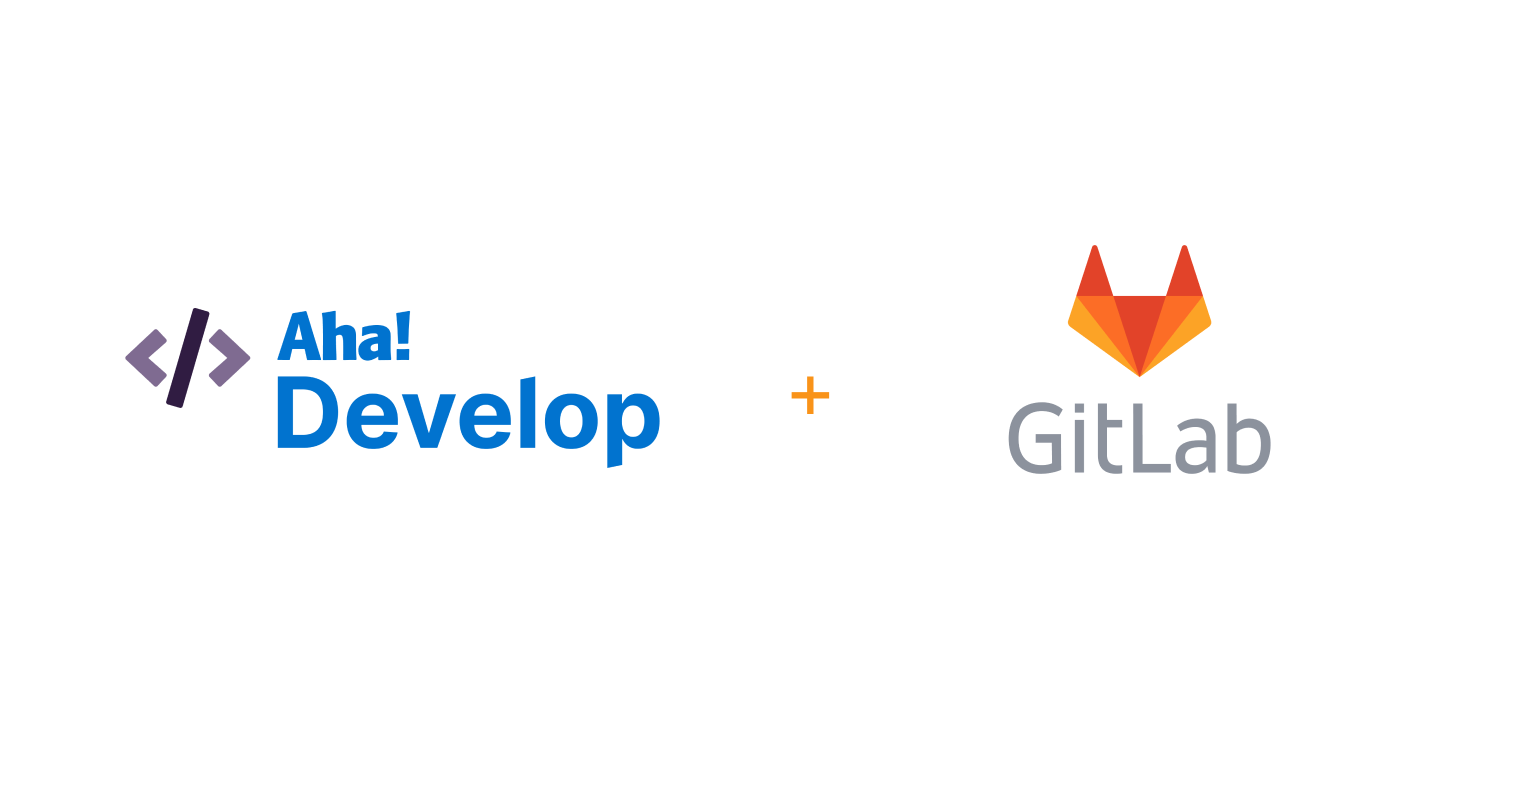 Hero image for the Aha! Develop Gitlab go-to-market